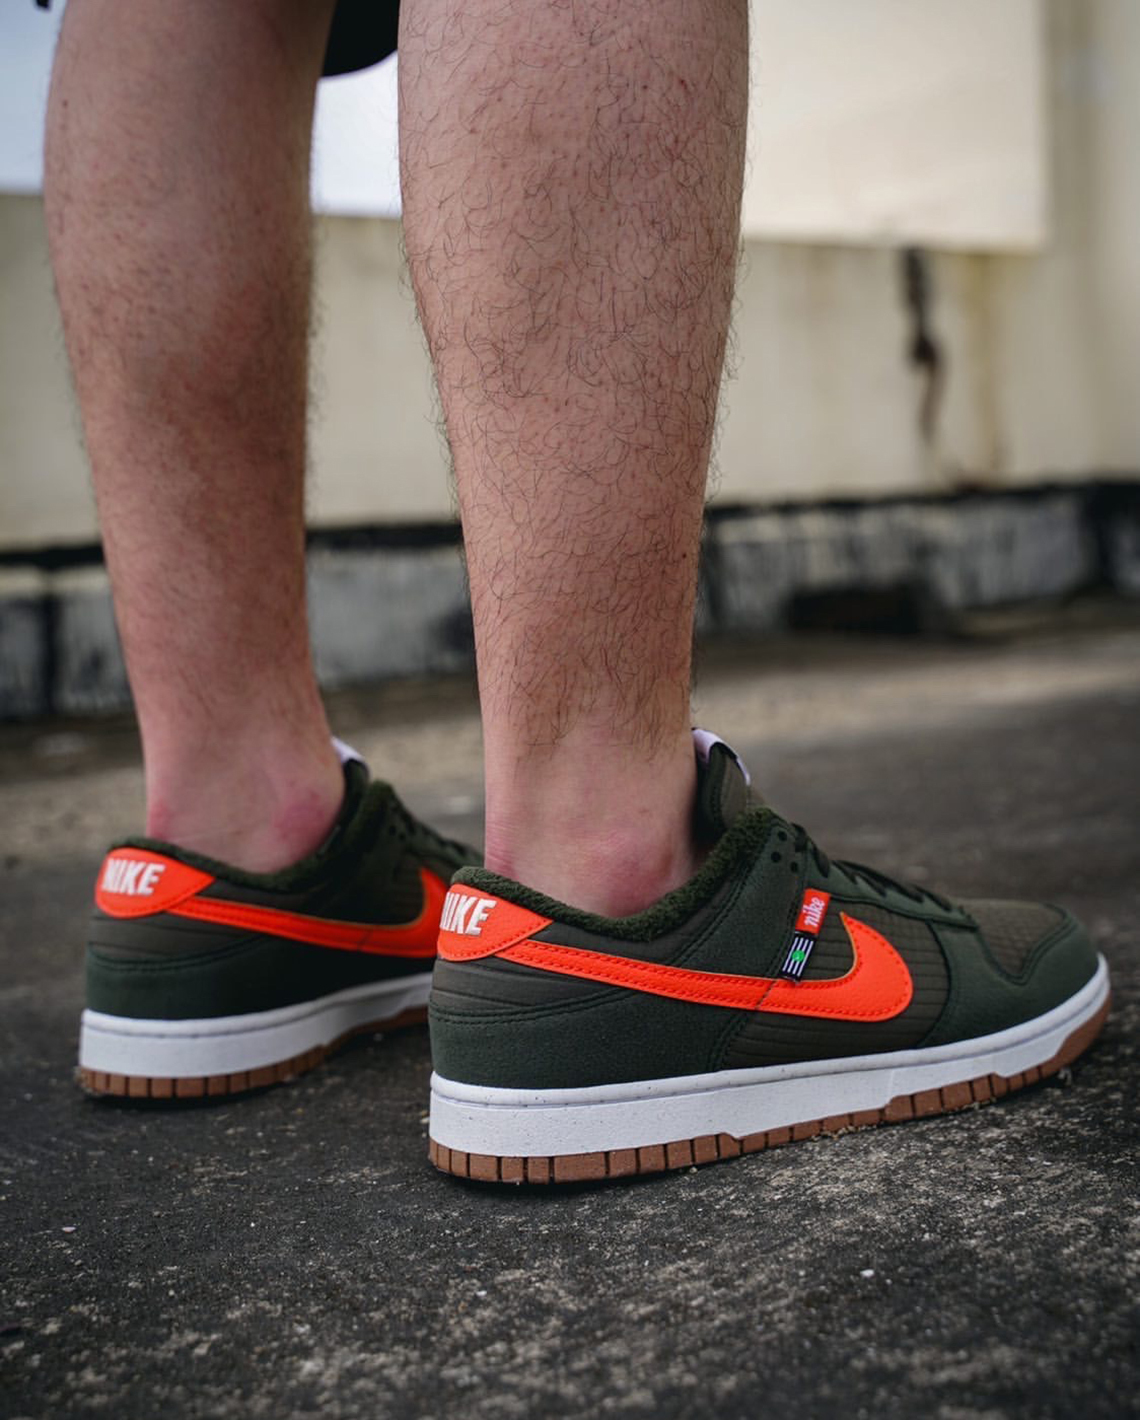 hinh-anh-chi-tiet-ve-nike-dunk-low-toasty